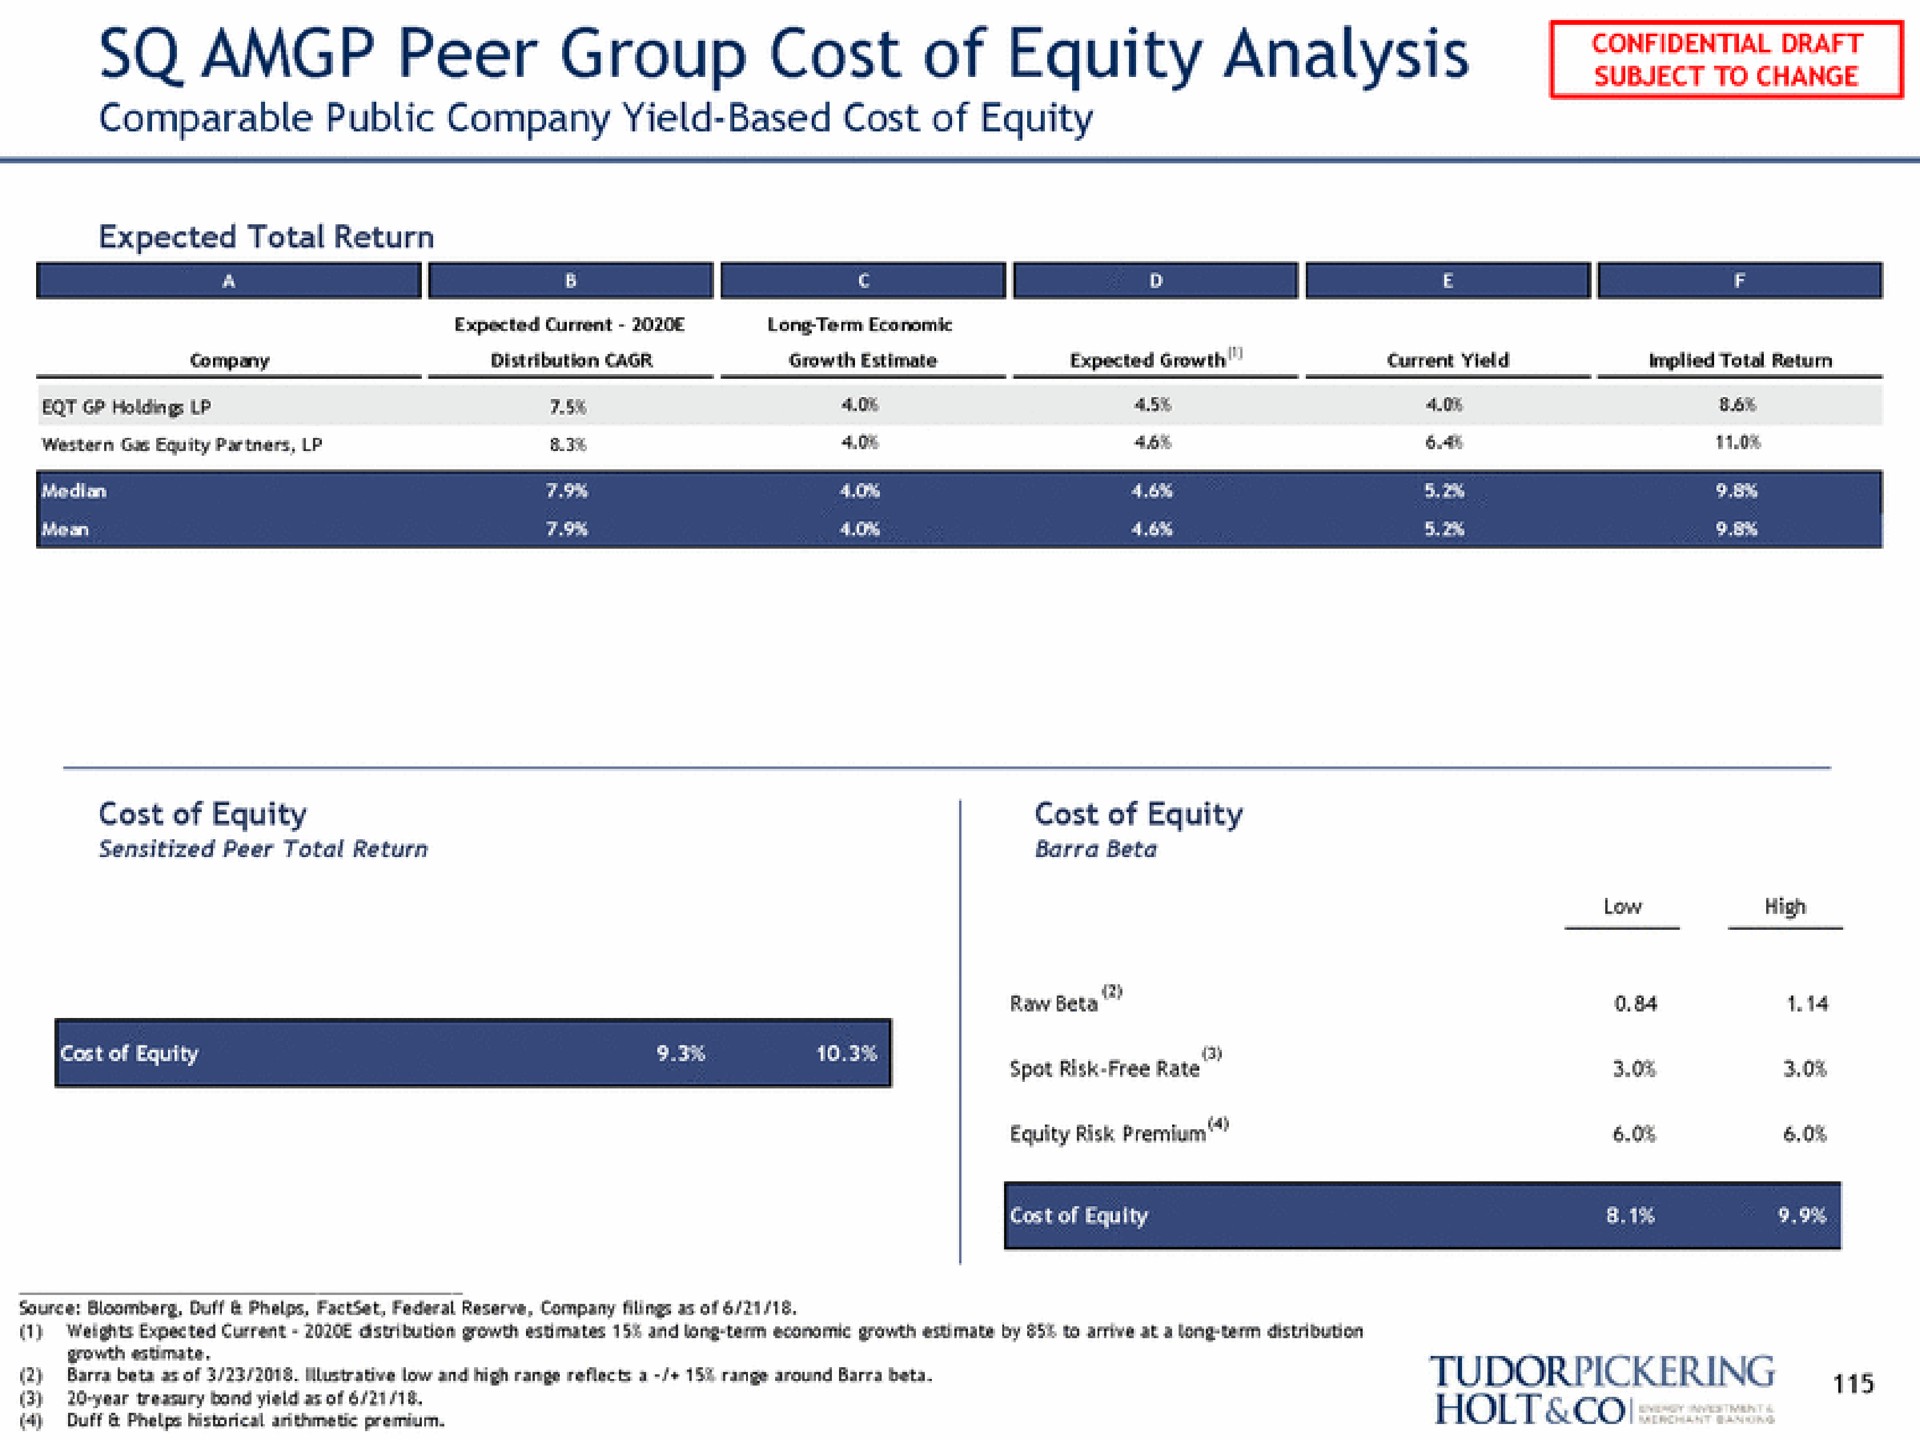 peer group cost of equity analysis oer subject to change a a | Tudor, Pickering, Holt & Co